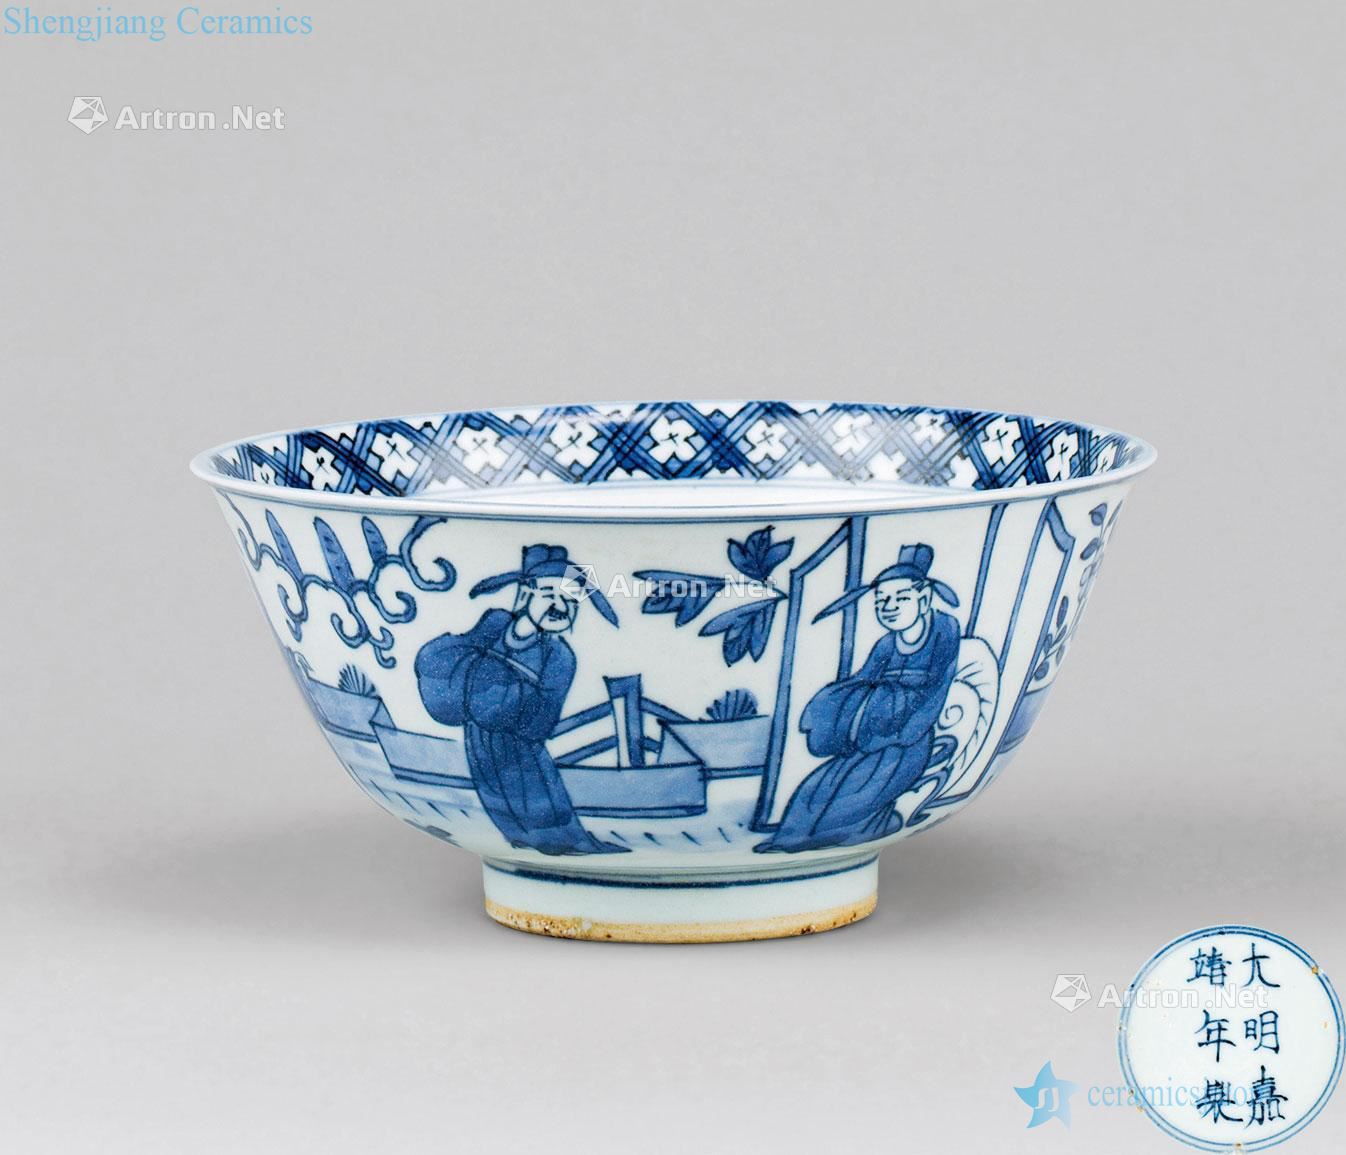 In the Ming dynasty (1368-1644) blue and white high green-splashed bowls